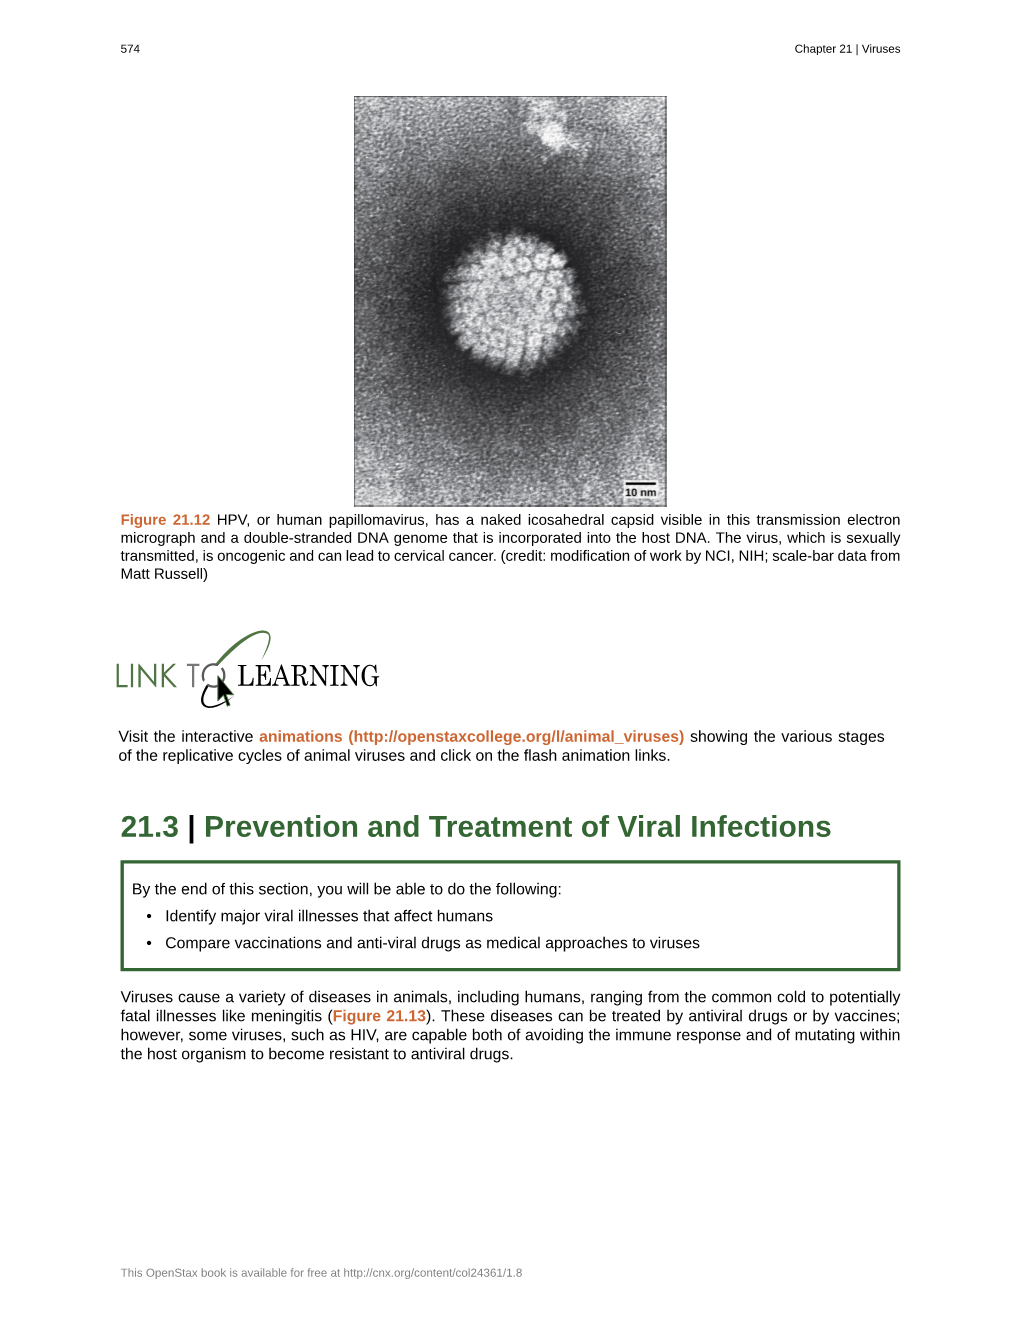 Prevention and Treatment of Viral Infections